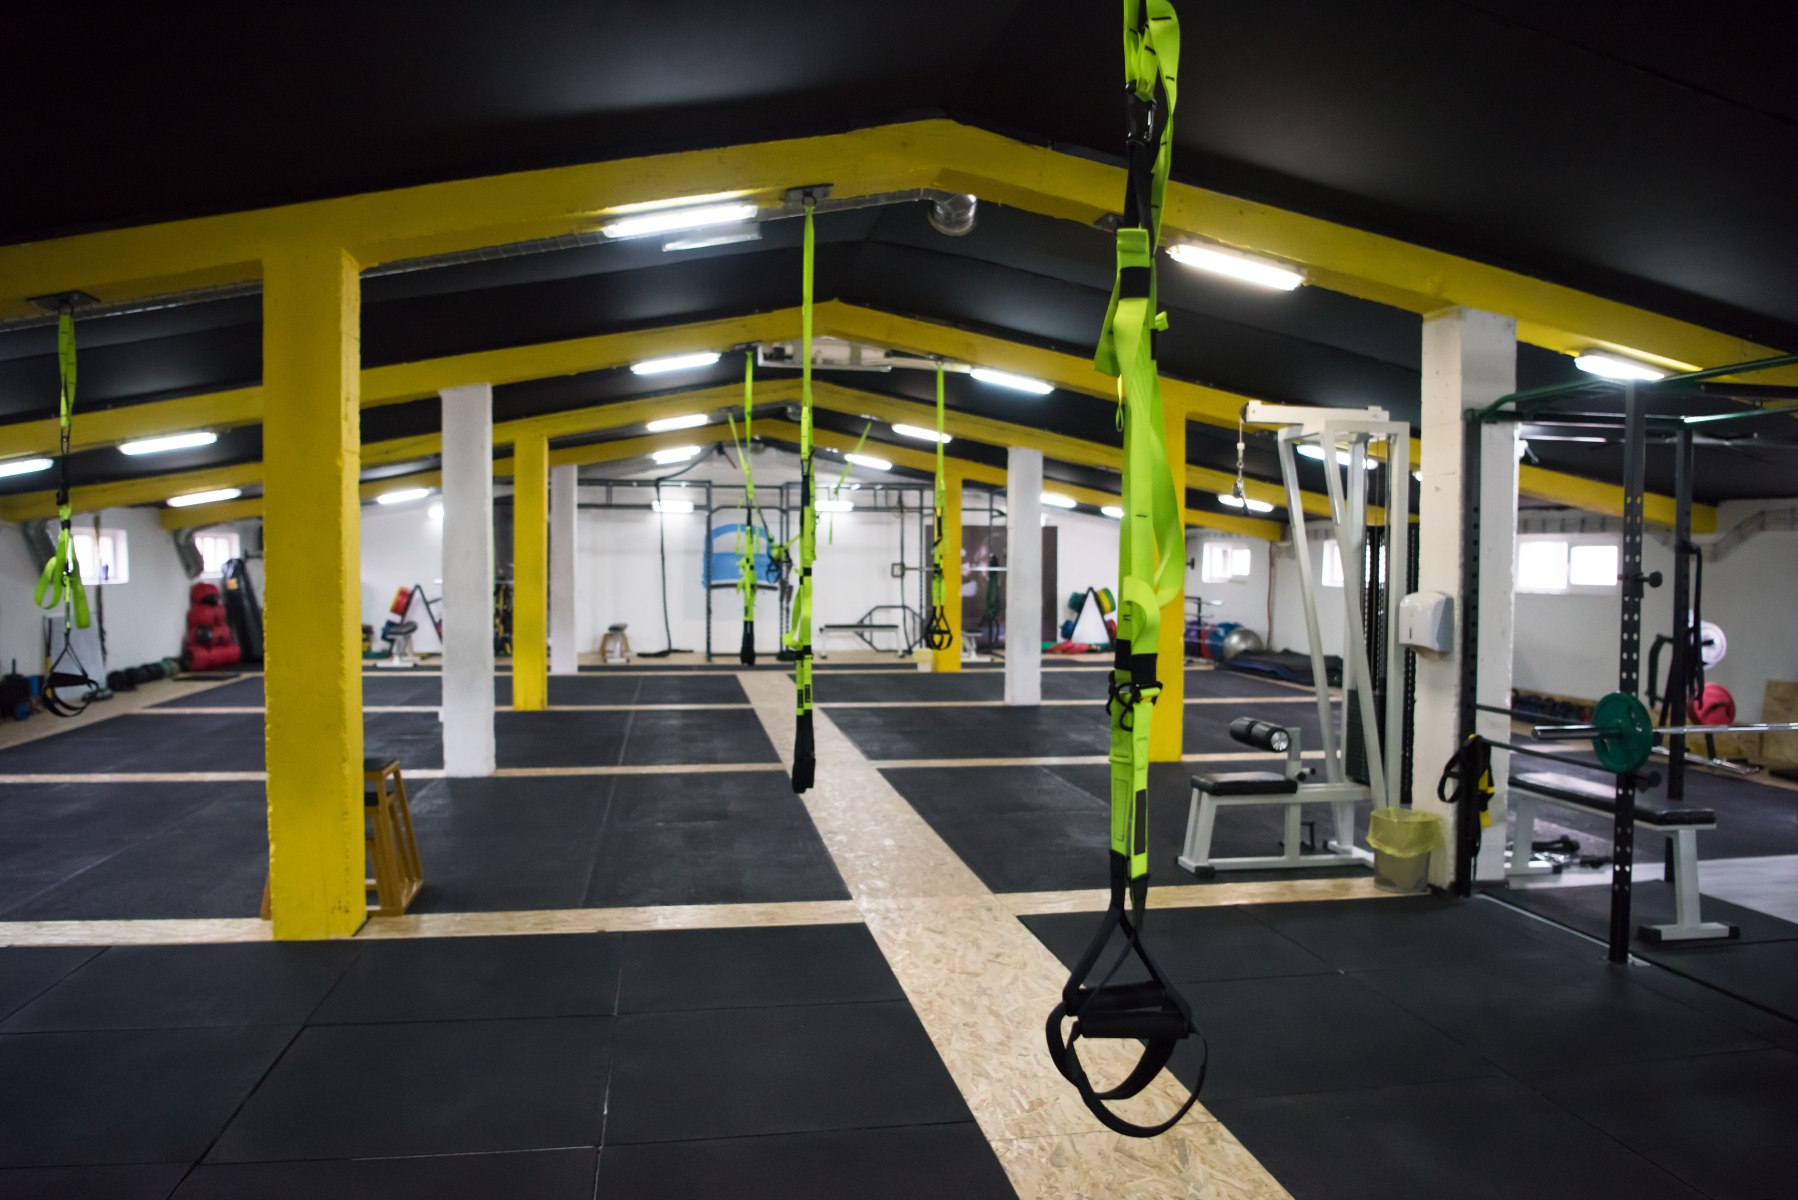 How To Build A Crossfit Gym in a Metal Warehouse